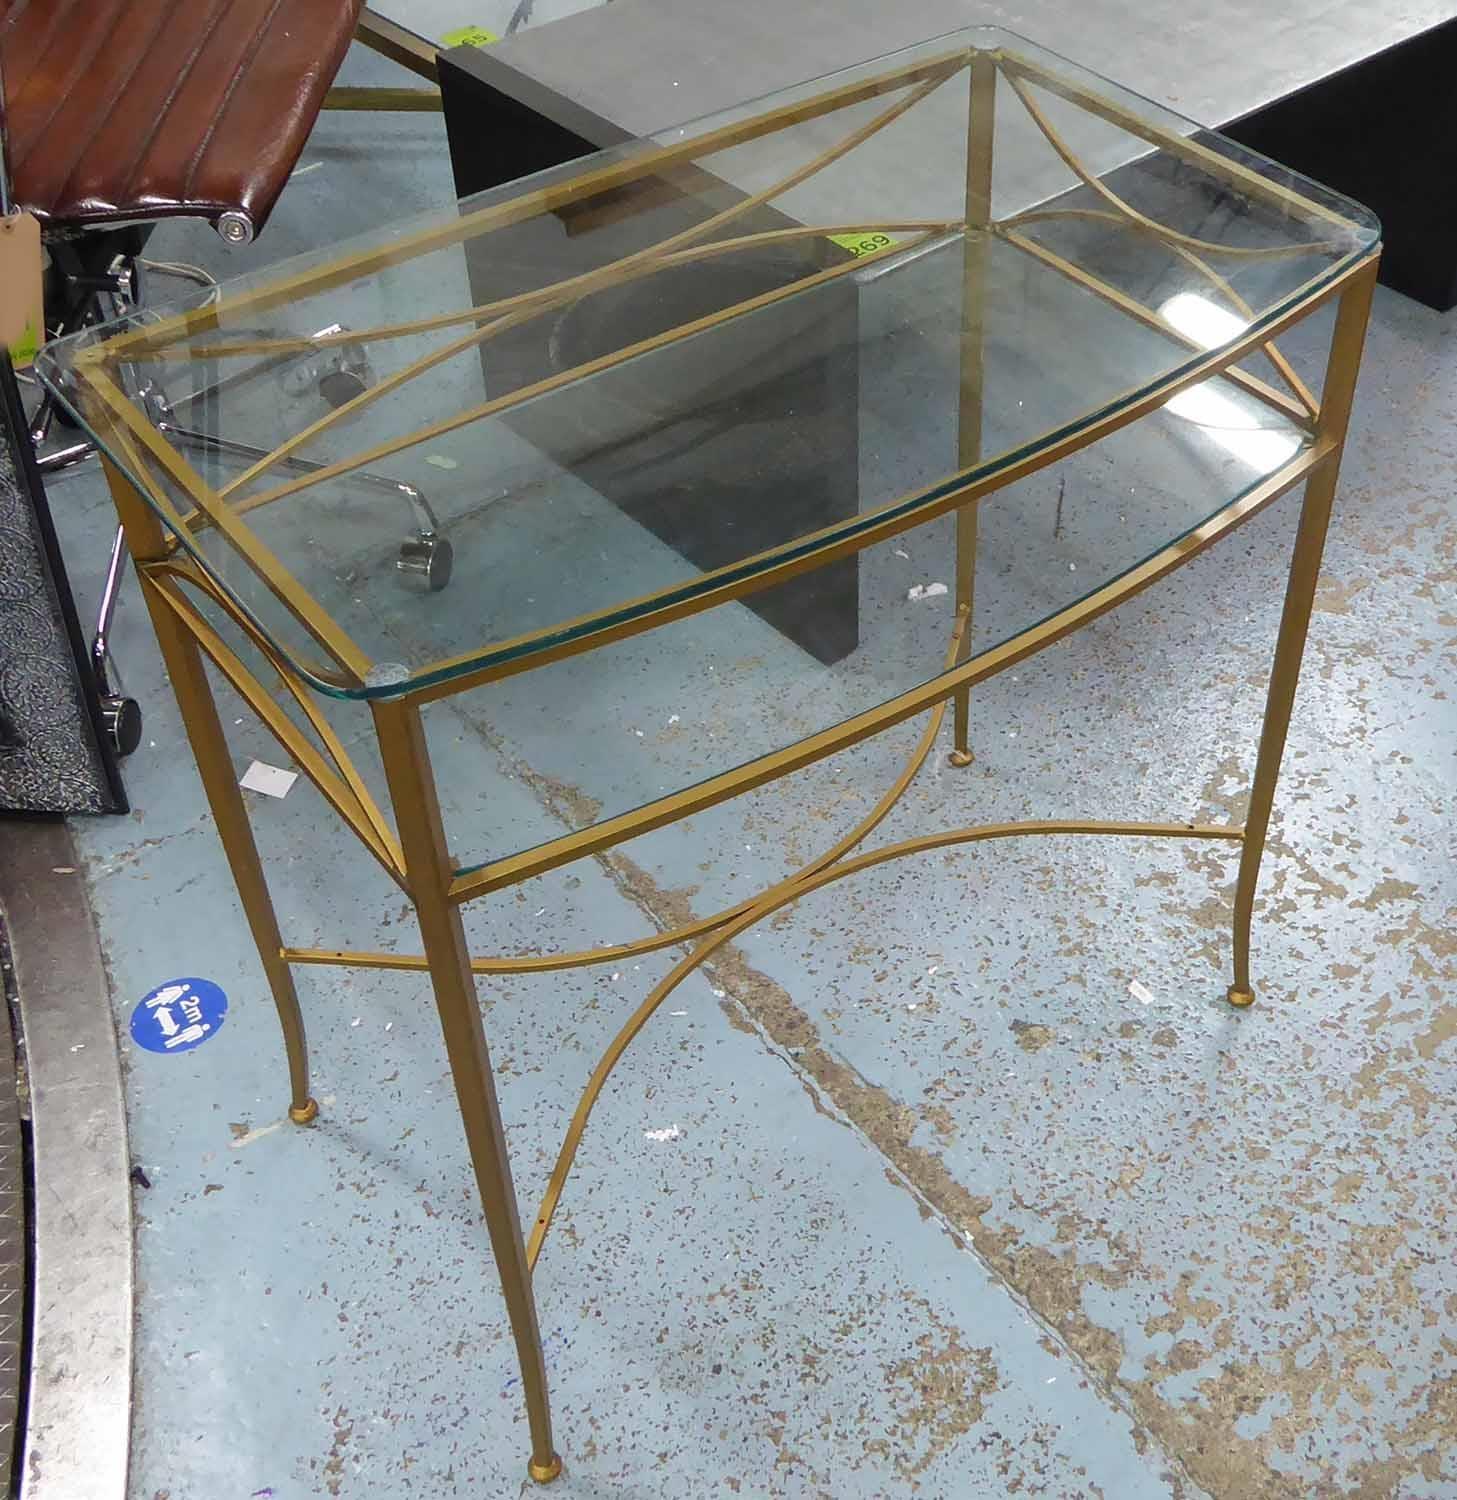 CONSOLE TABLE, bow fronted gilt metal with two tier glass shelves, 74cm x 44cm x 74cm H.